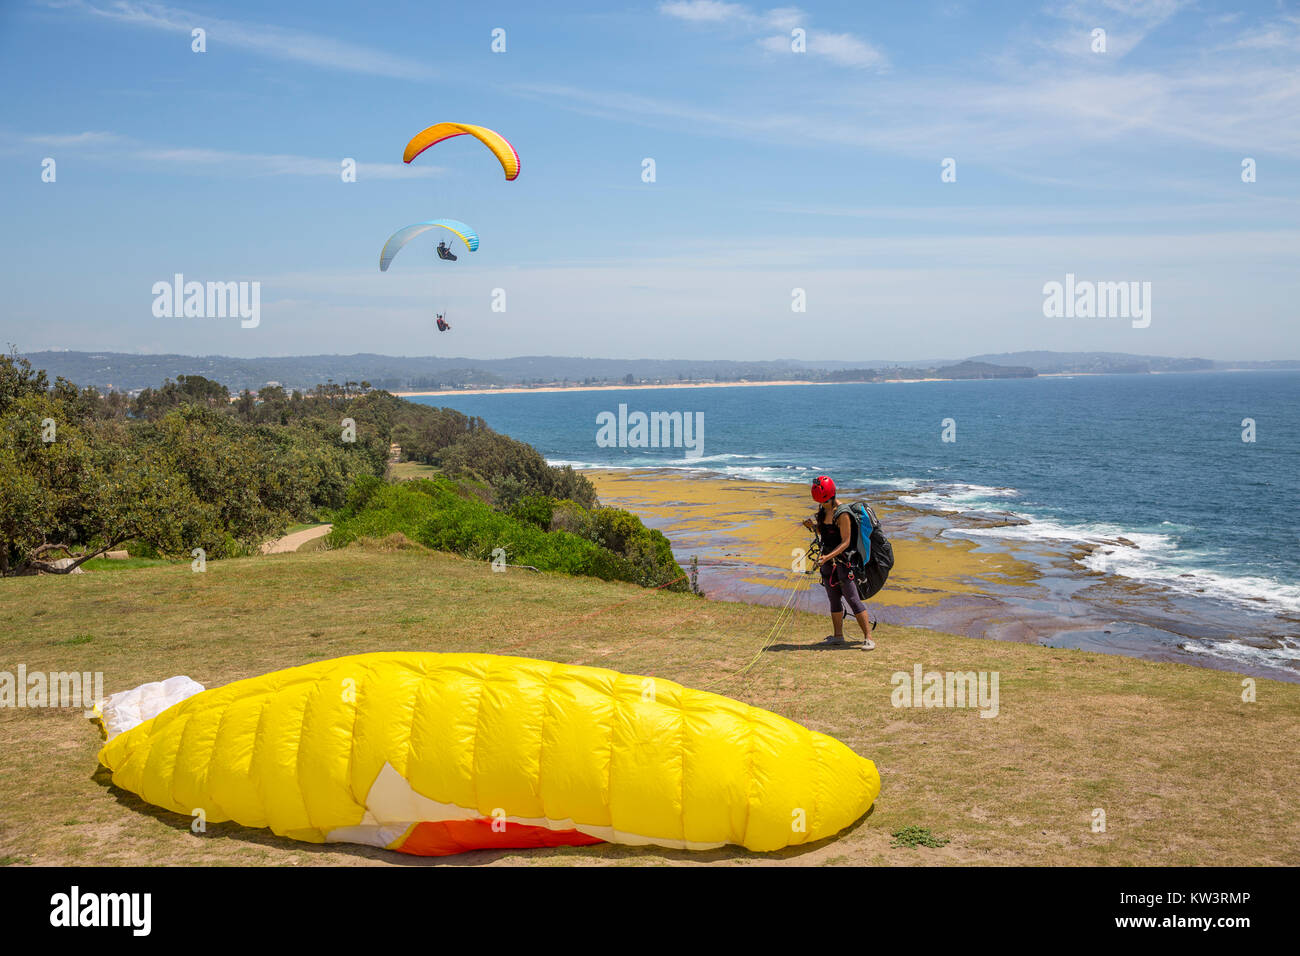 Hang gliding and paragliding is popular at Long Reef aquatic reserve on Sydney northern beaches,Australia, here a lady prepares for take off Stock Photo